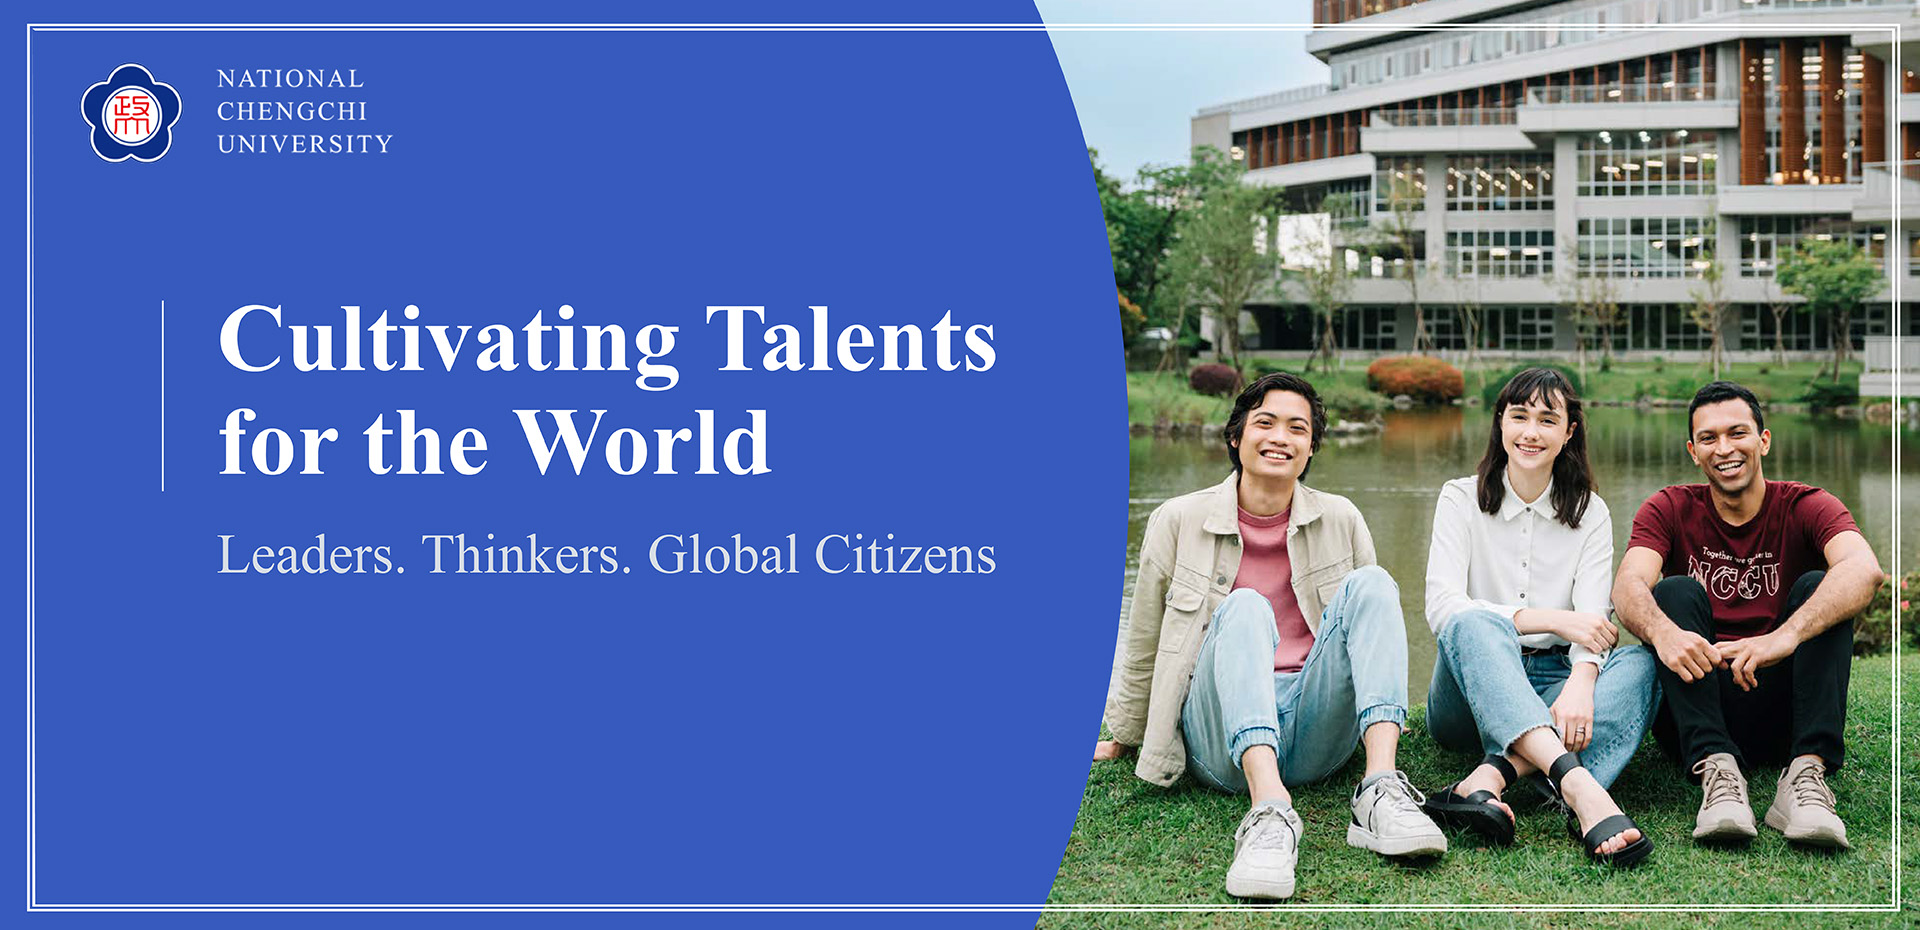 Cultivating Talents for the World